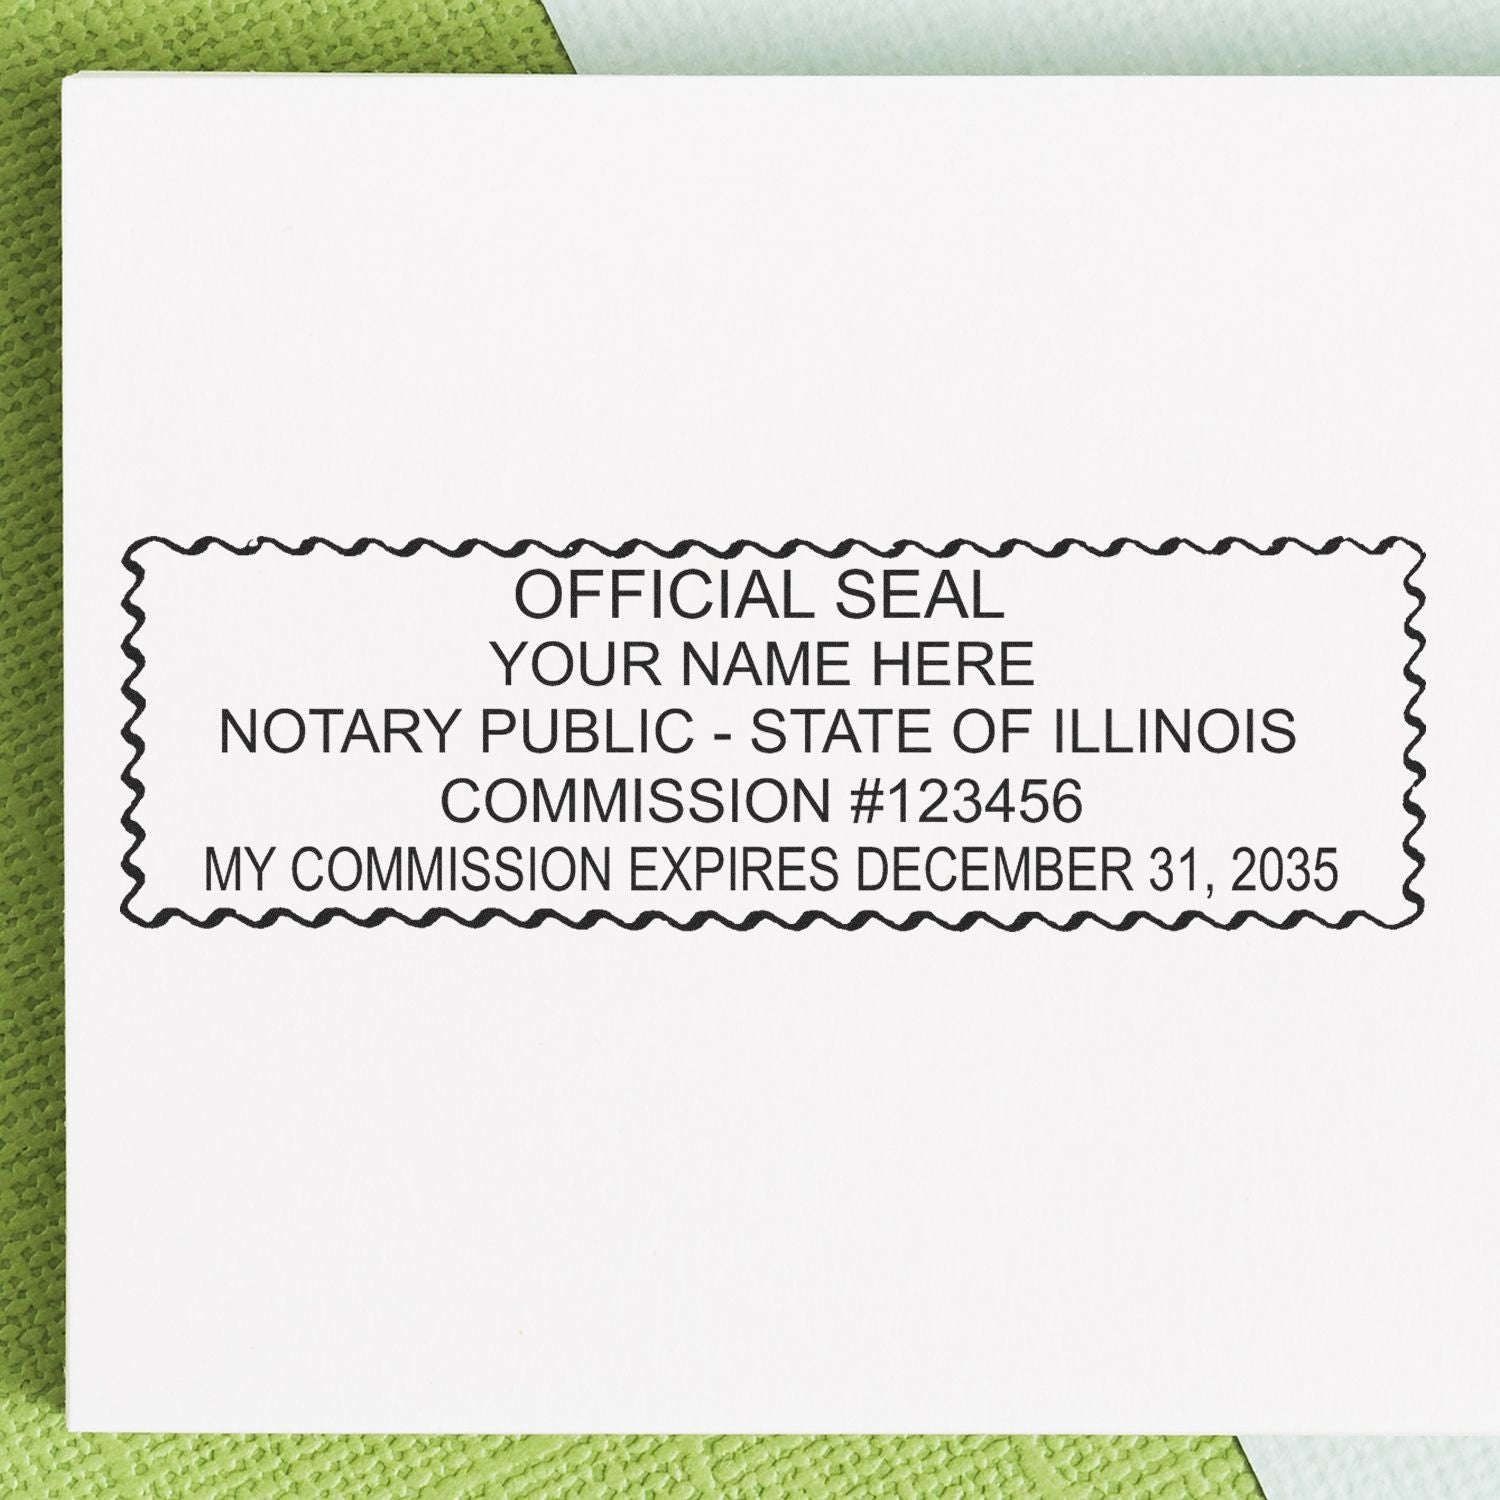 A photograph of the Heavy-Duty Illinois Rectangular Notary Stamp stamp impression reveals a vivid, professional image of the on paper.